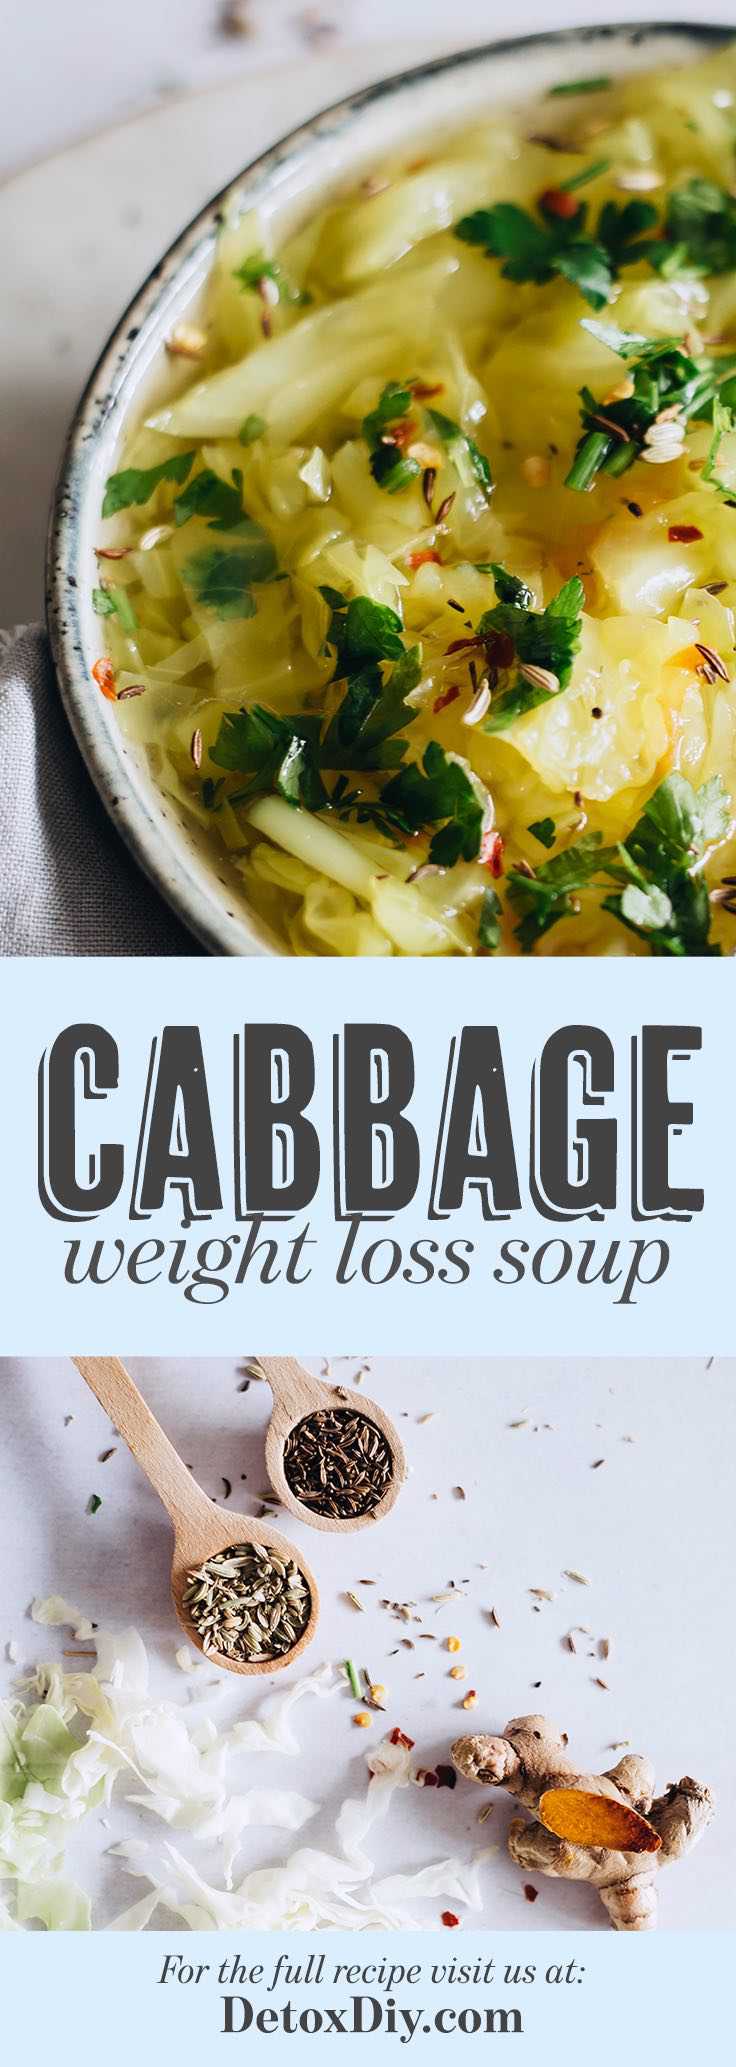 This cabbage weight loss soup really works!